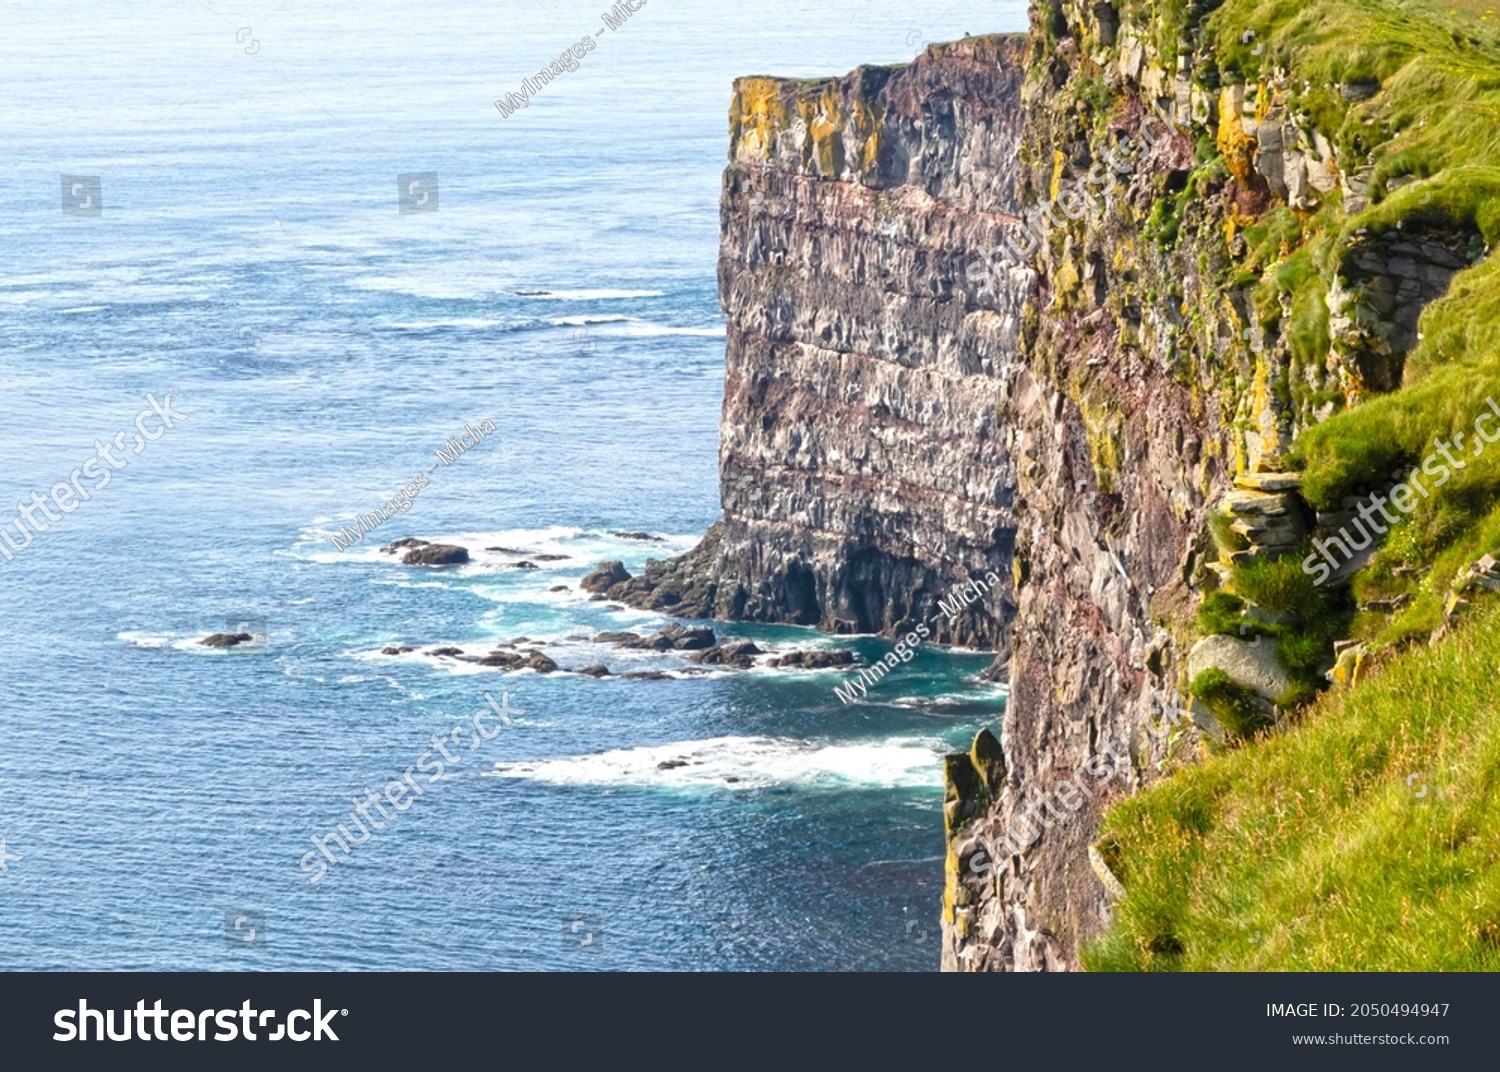 These majestic high cliffs are in Latrabjarg promontory, westernmost point in Iceland - Home to millions of birds, they re Europe's largest bird cliffs, 14Km long and up to 440m high #2050494947